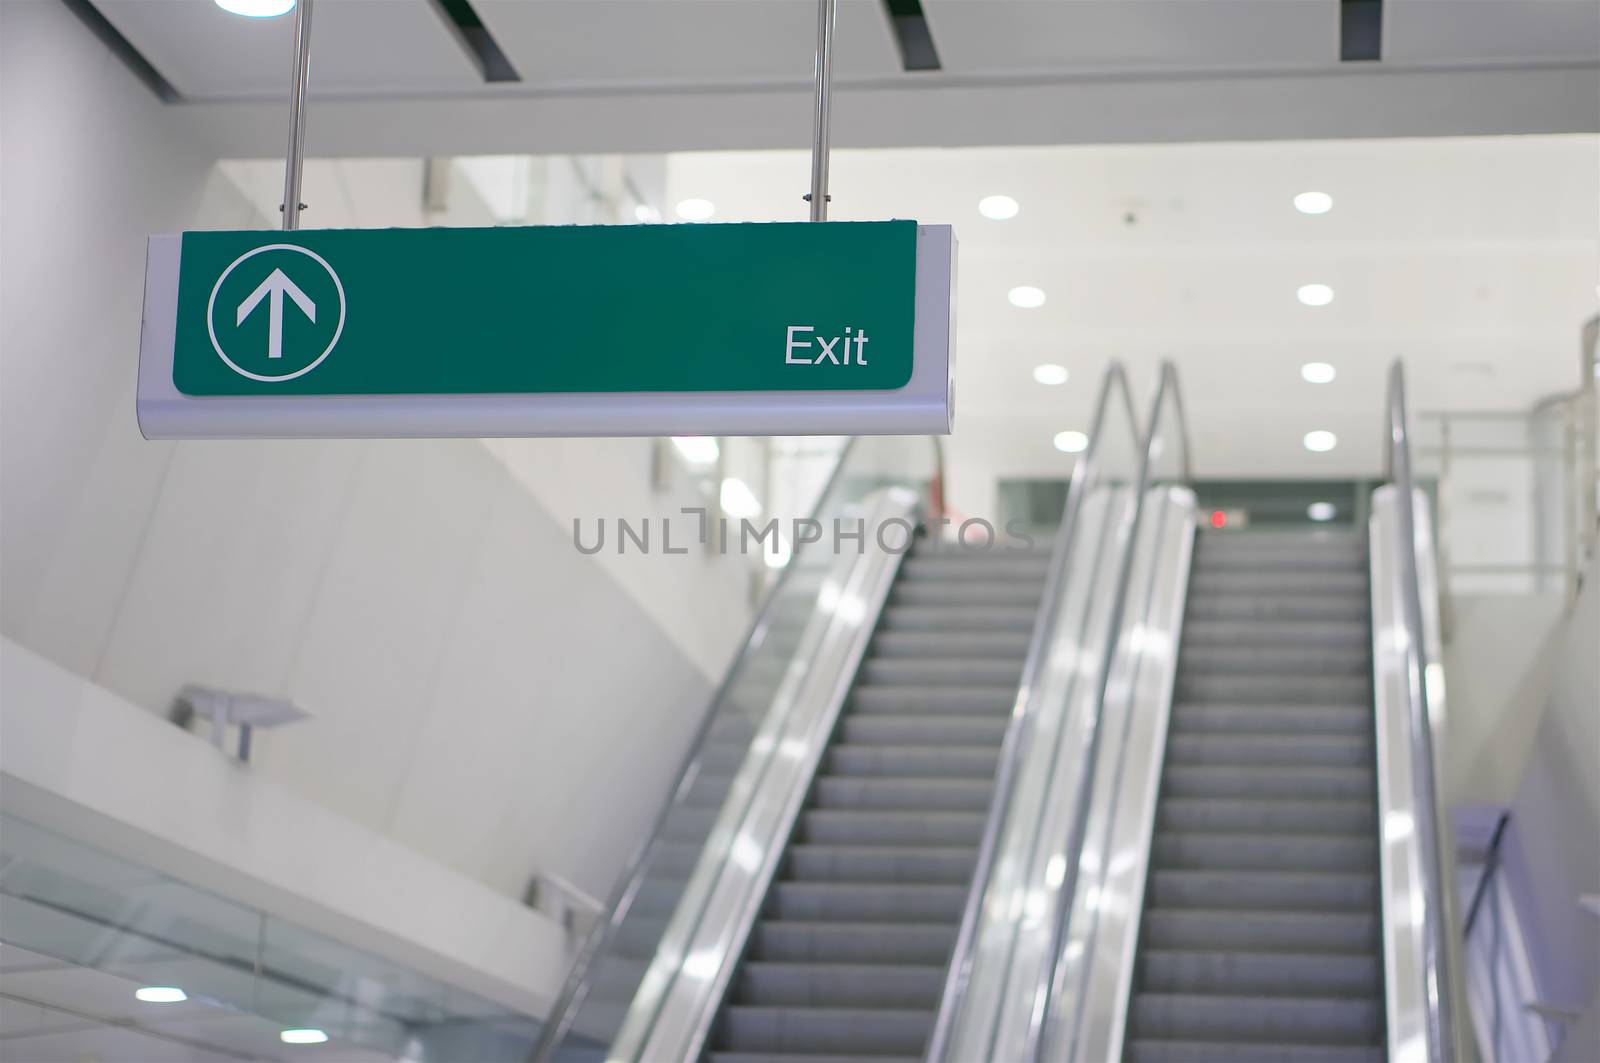 Exit information board sign with white character on green have blur escalator as background at subway electric train station.